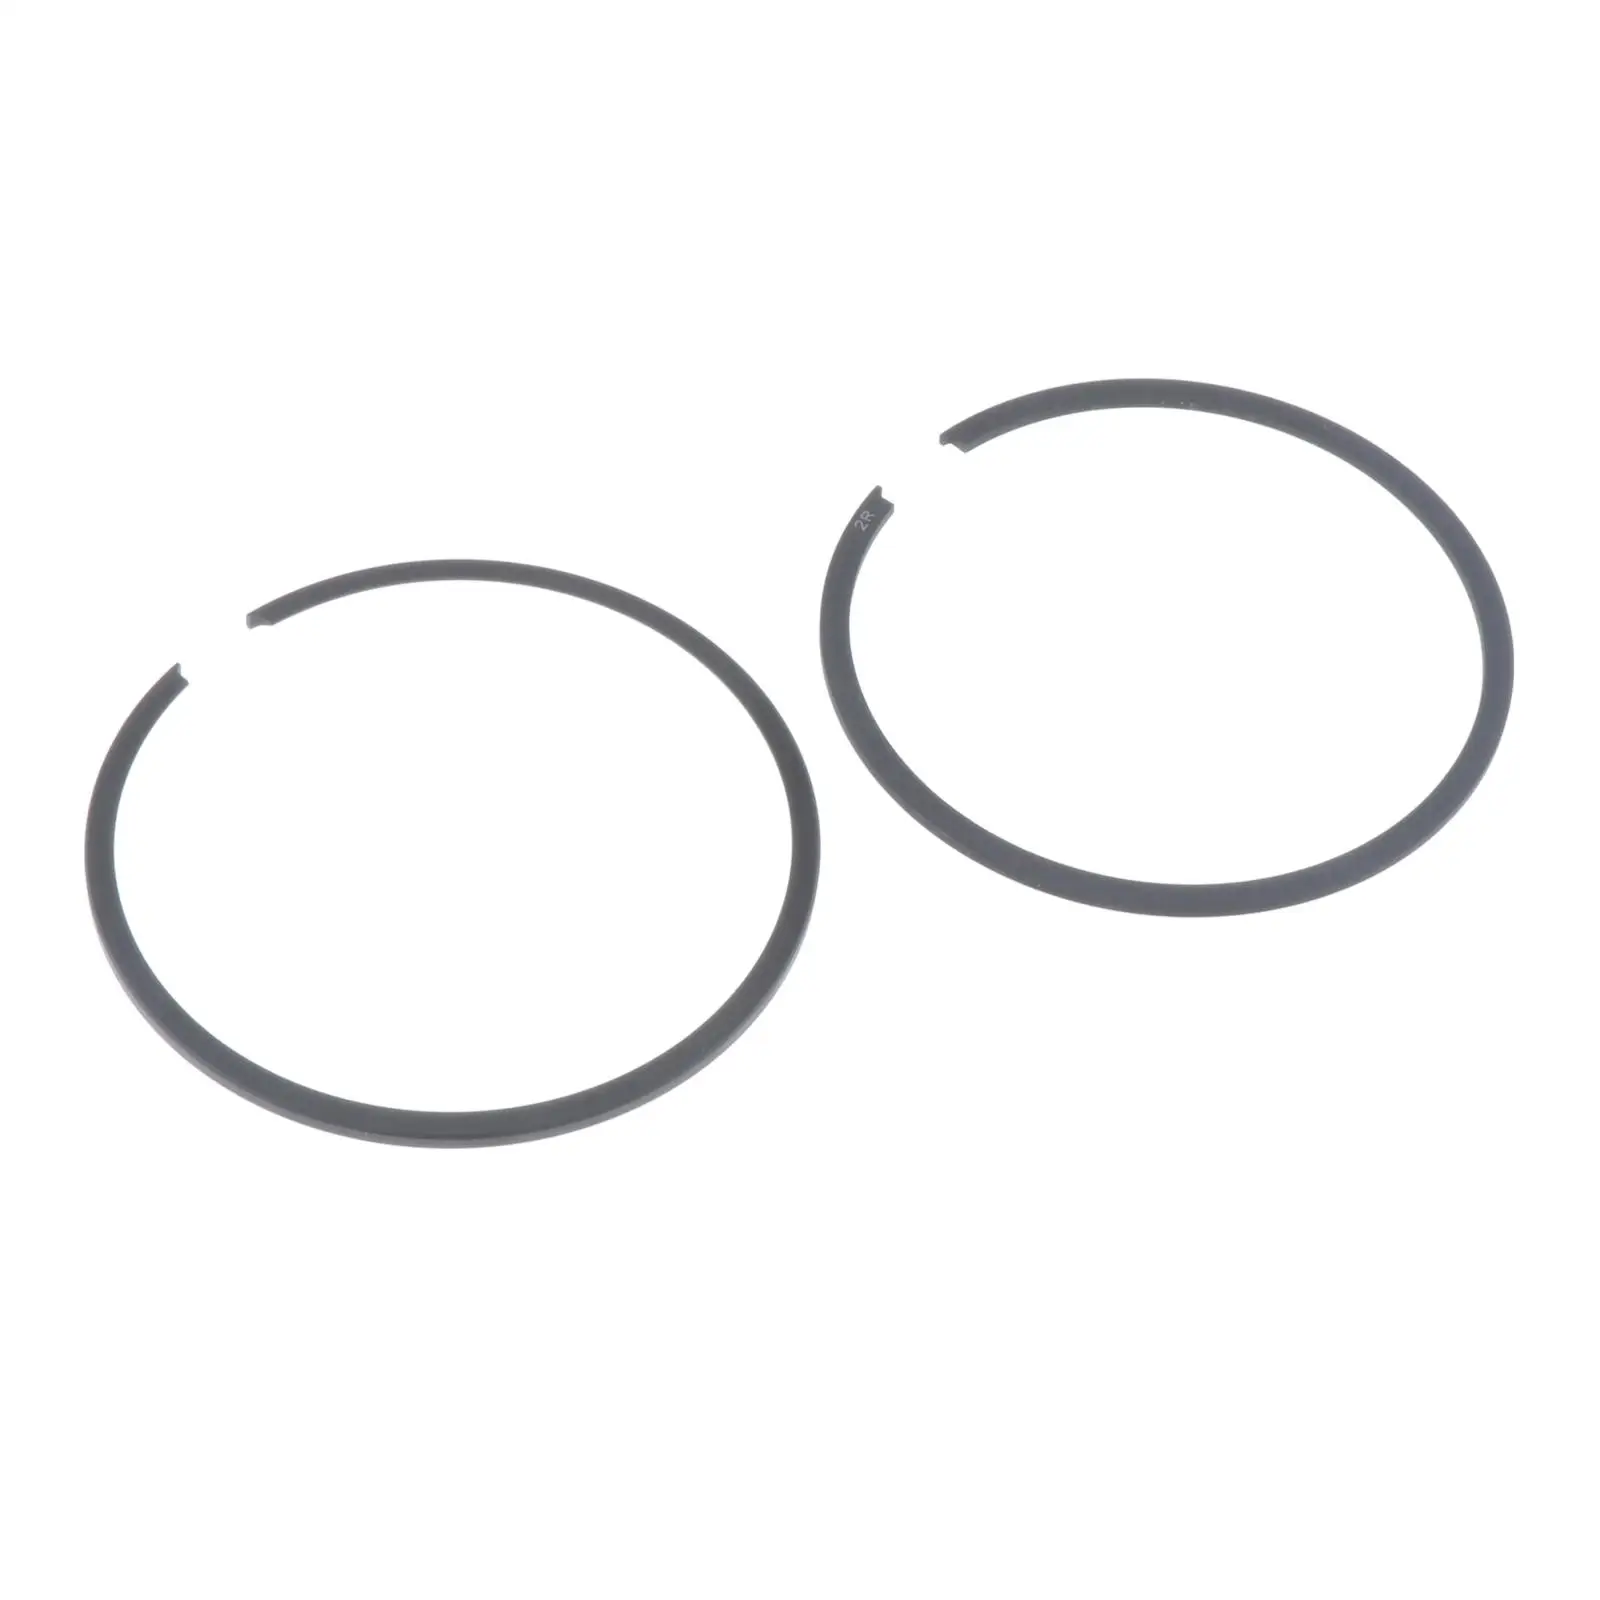 2 Pieces Vehicle Piston Rings 0396377 396377 0385807 for JOHNSON EVINRUDE